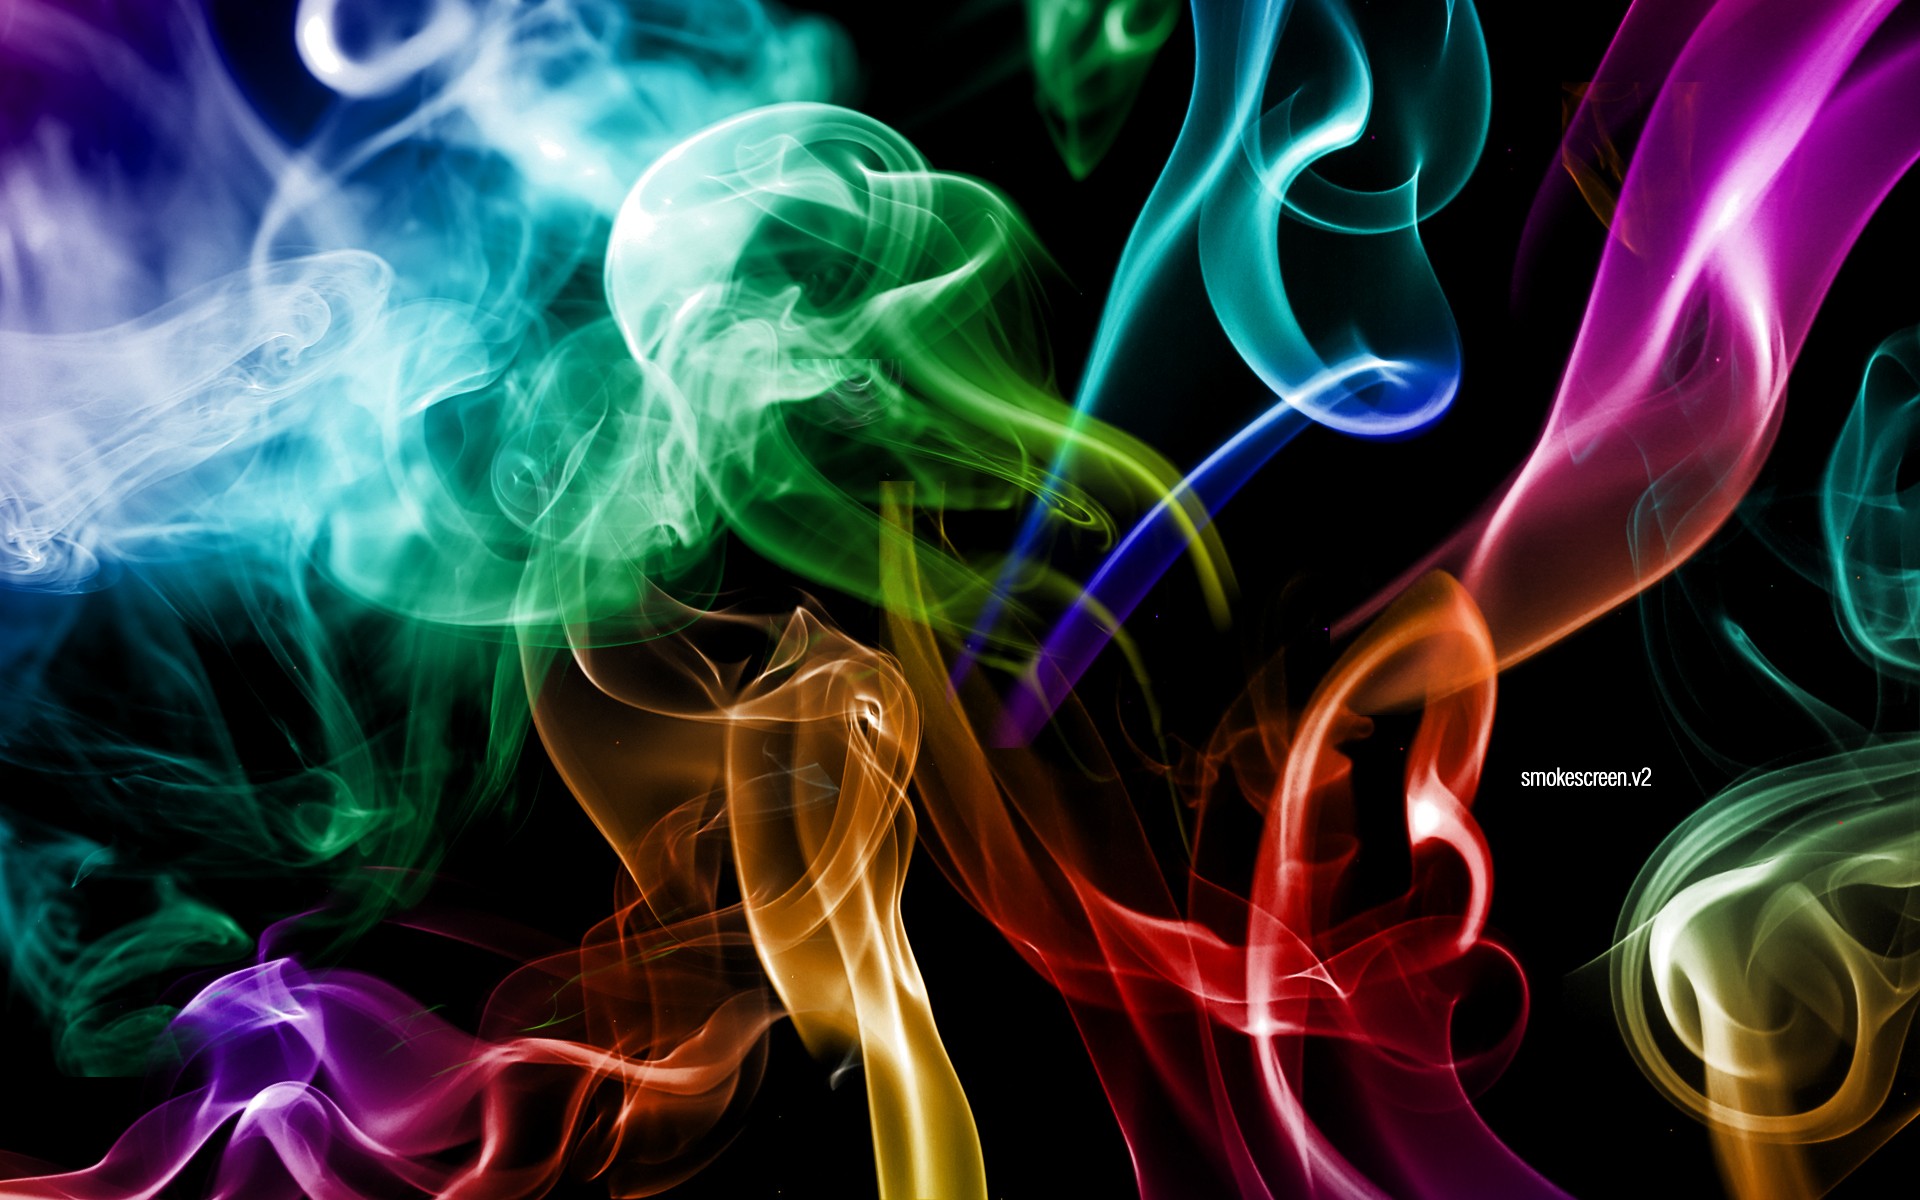 Colored Smok HD Wallpaper, Background Images